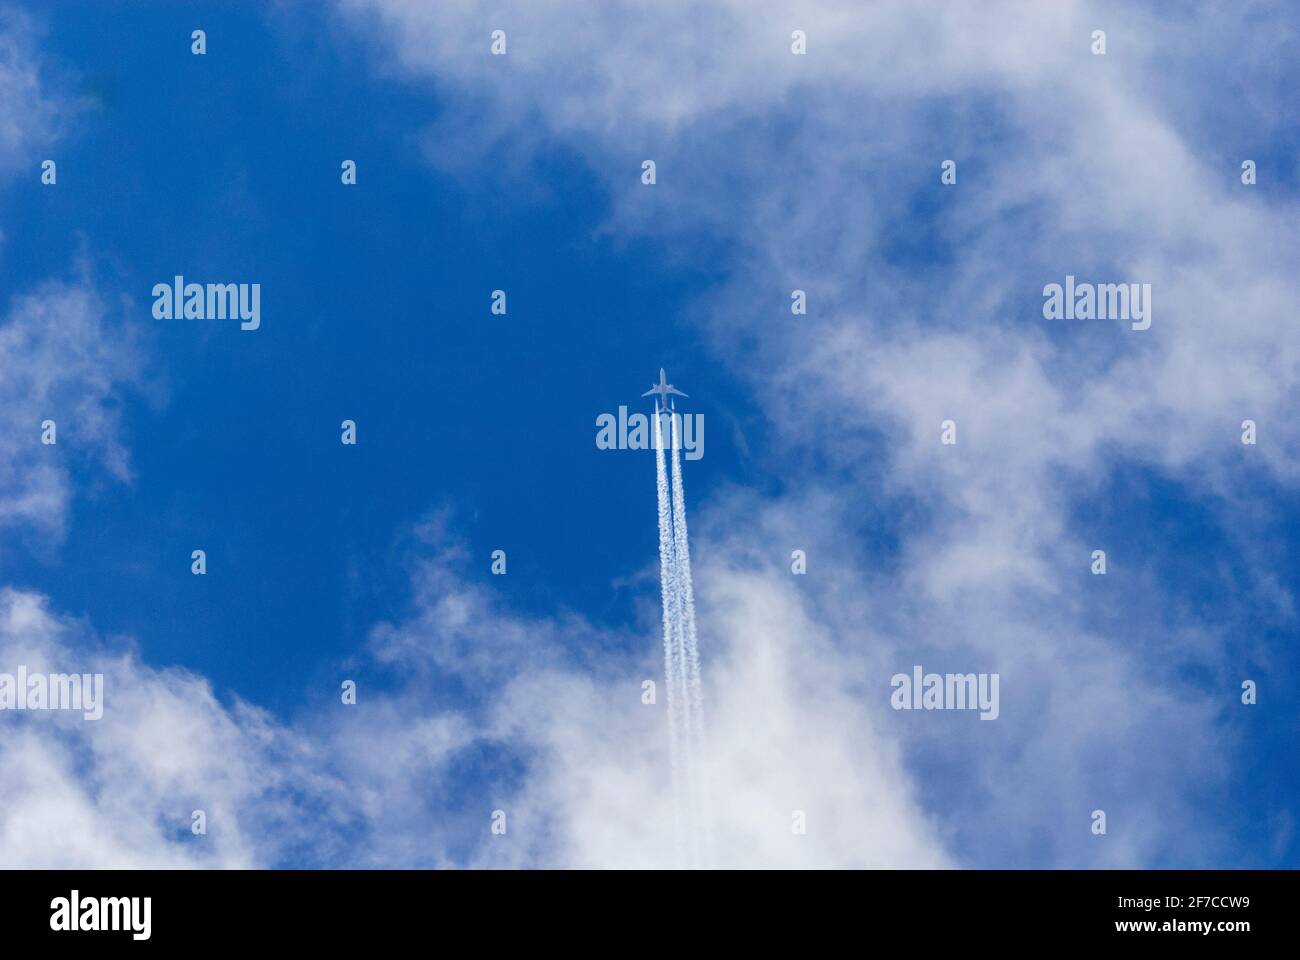 Twin engined jet aeroplane leaves contrails across deep blue sky with white clouds. Stock Photo